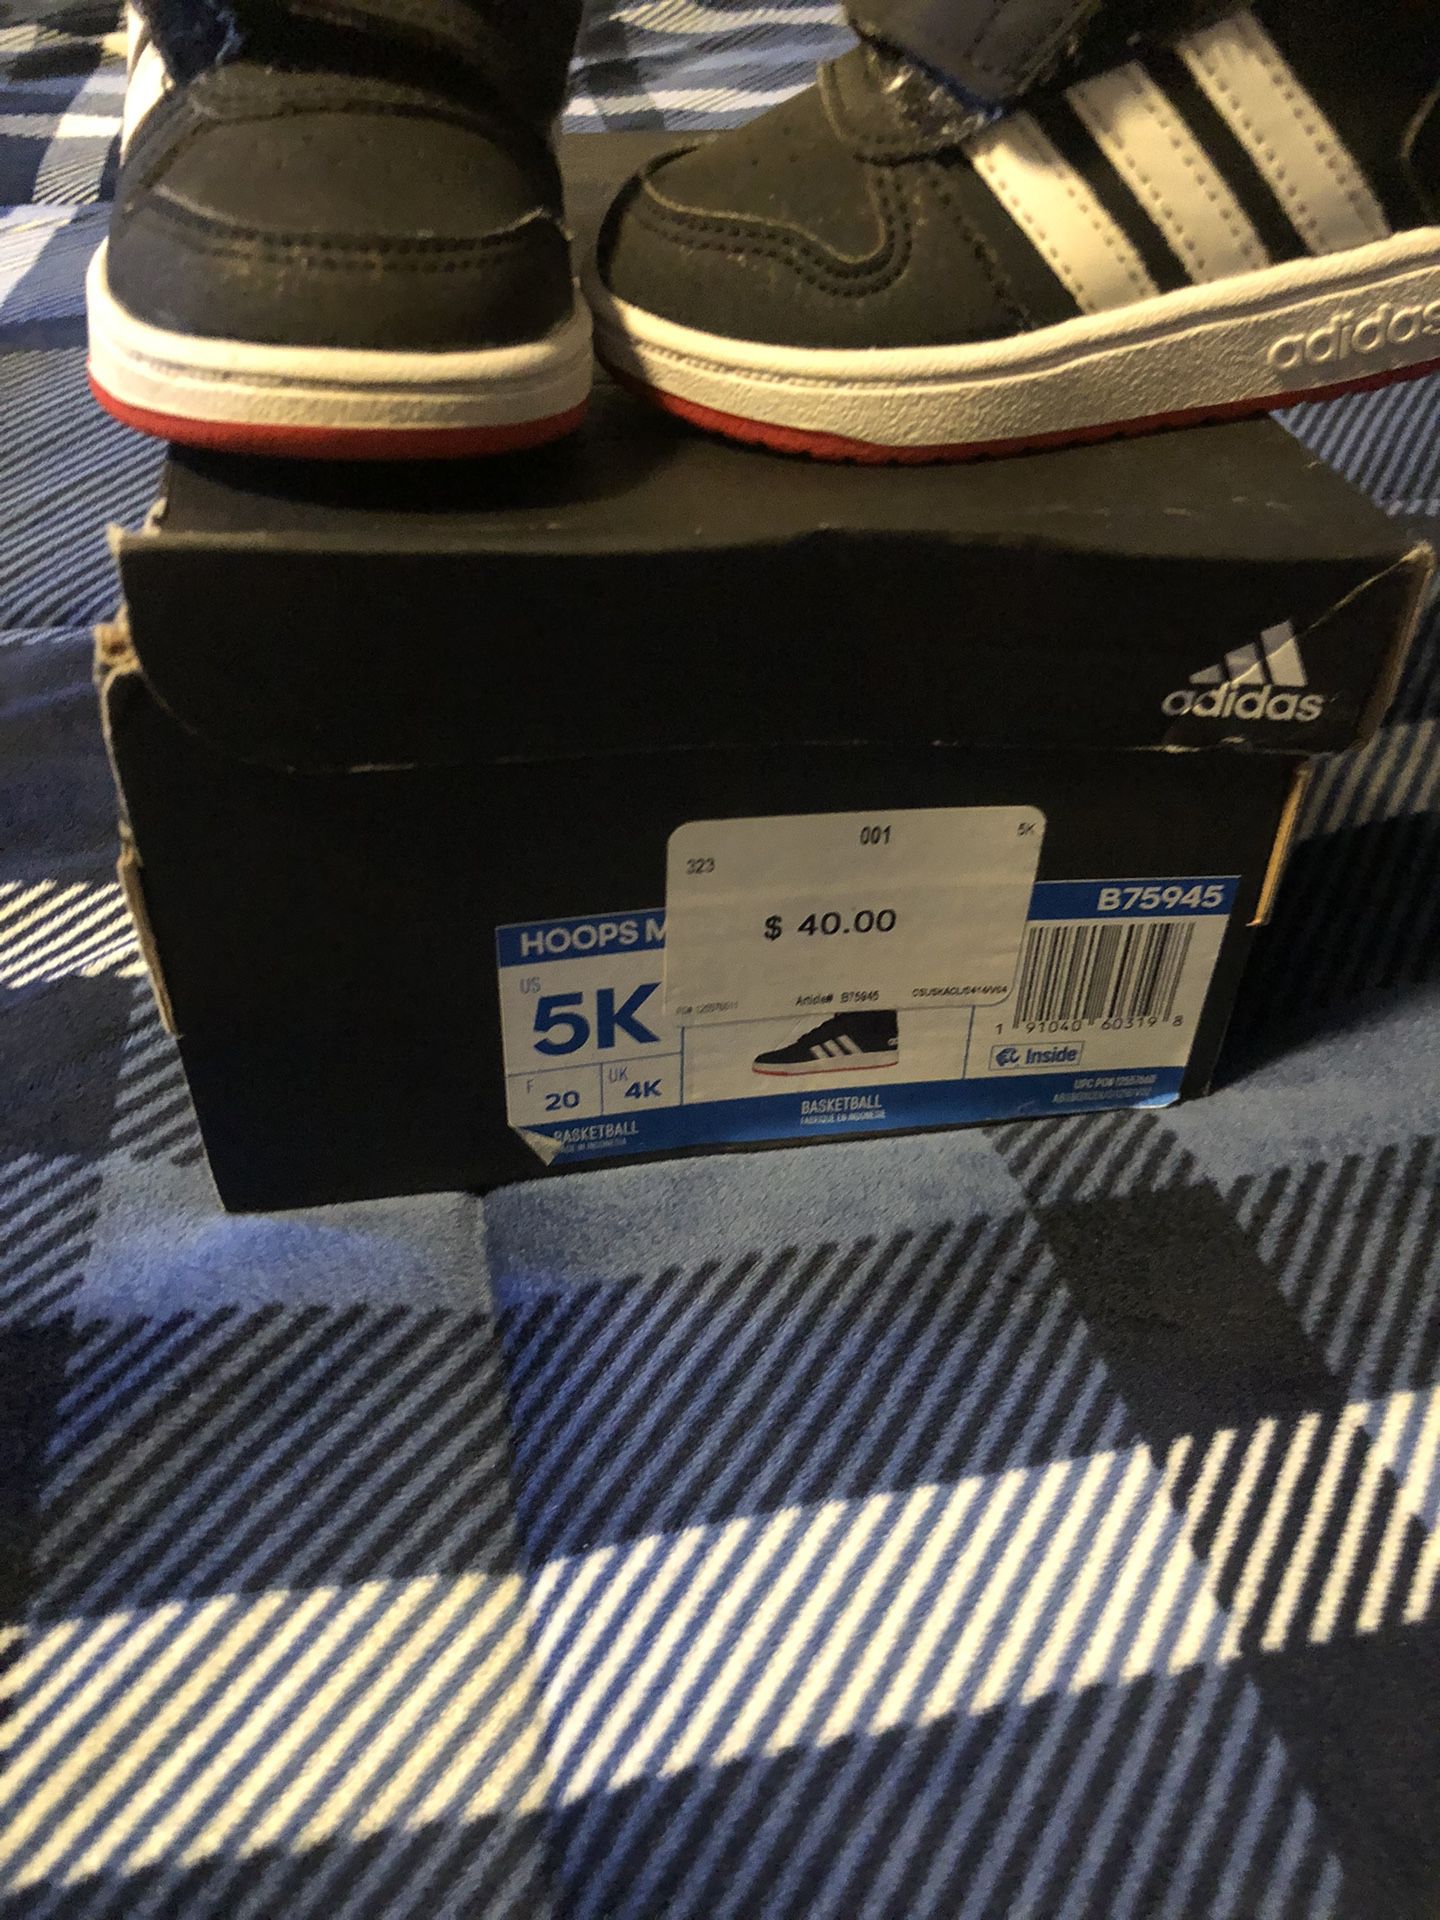 Adidas Toddler Size 5 Shoes